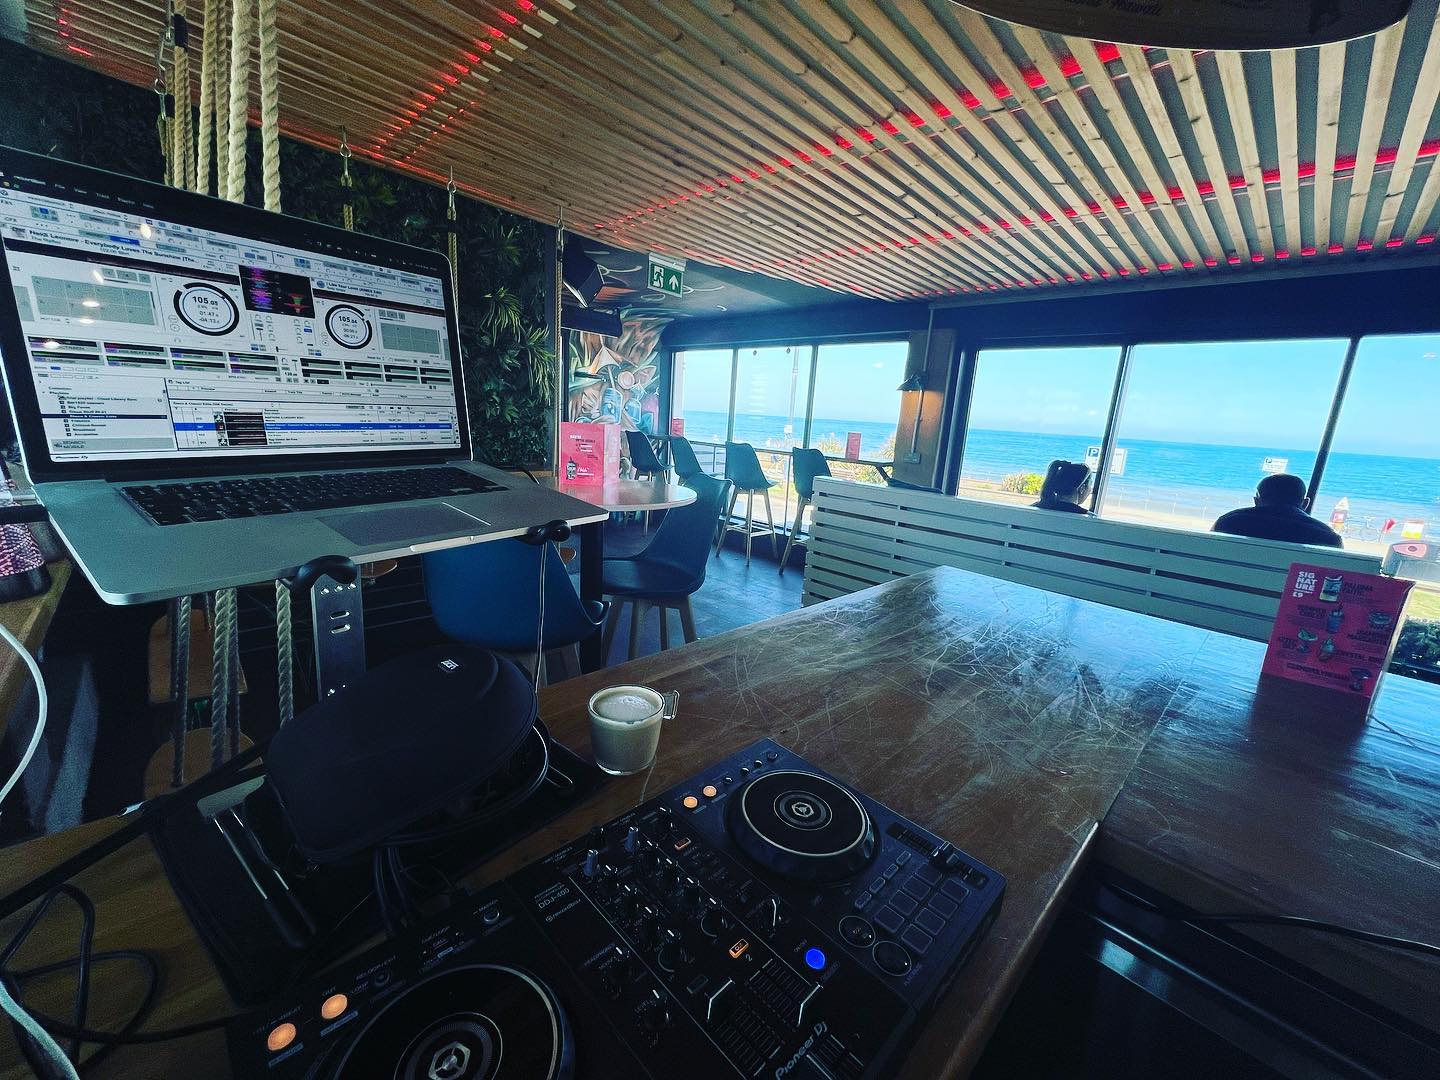 View from today’s dj booth! Last minute gig in Teignmouth and after last nights wicked gig in Dartmouth its all about the ‘mouth’s this weekend. #dj #djing #beachbar #ibizavibes #balearicbeats #pioneerdj #hululubar #teignmouth